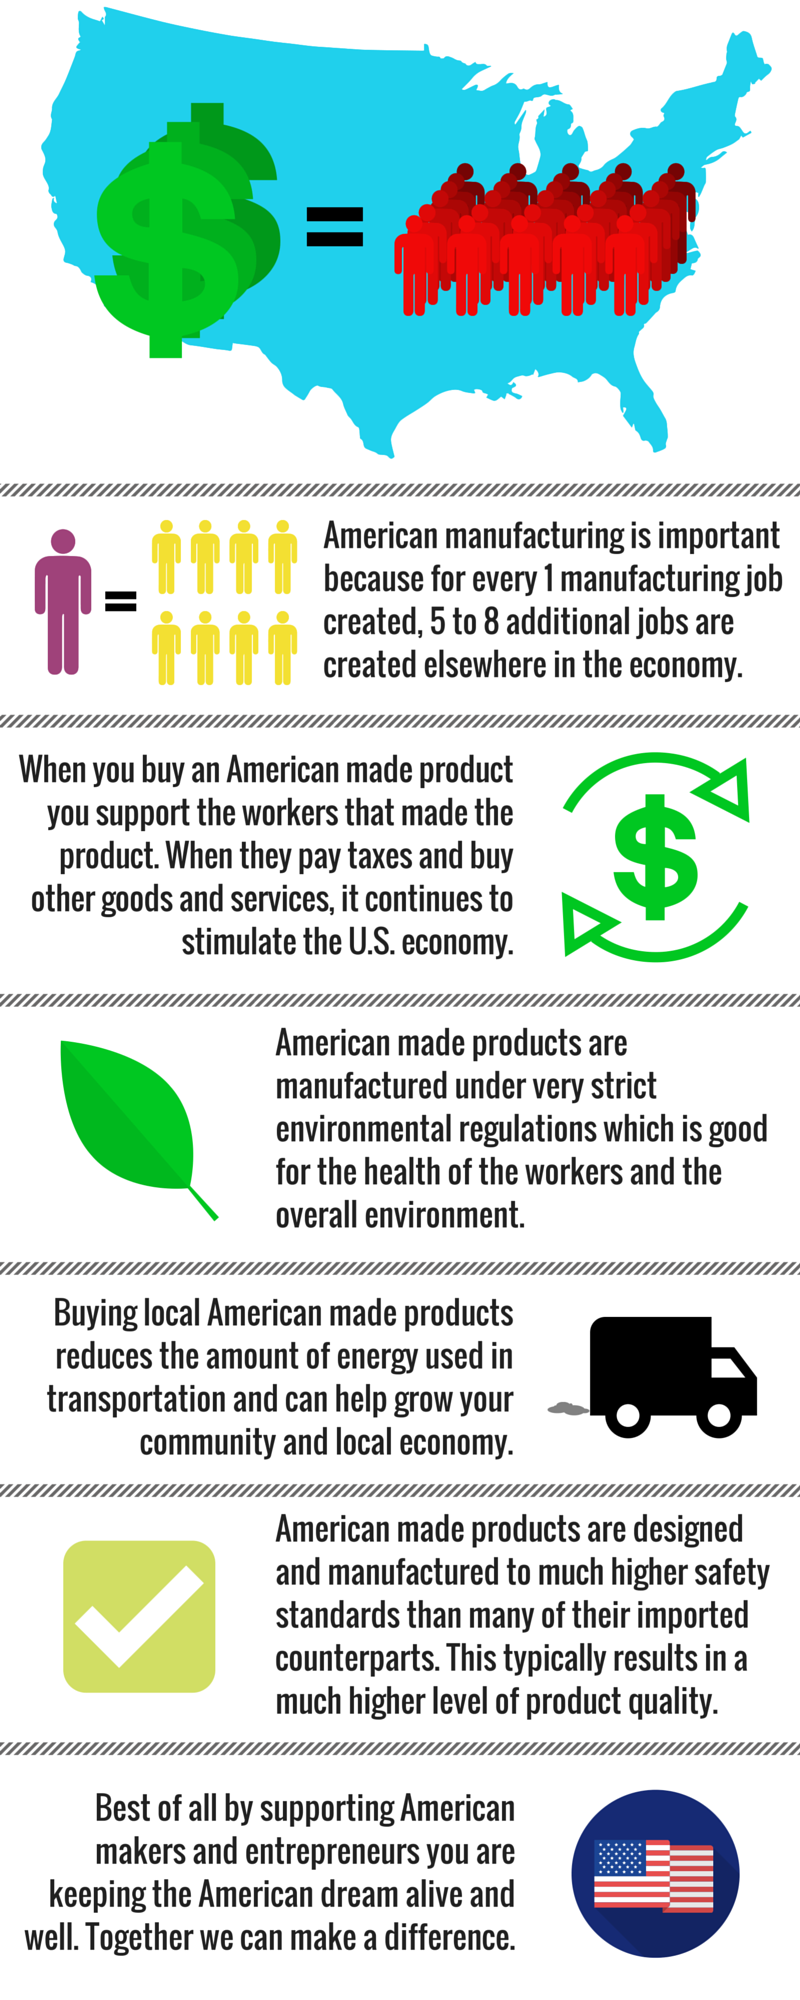 The power of a purchase is huge. If every American spent just $3.33 on American made goods it would create over 10,000 jobs; growing American manufacturing, helping the environment, and making a difference.